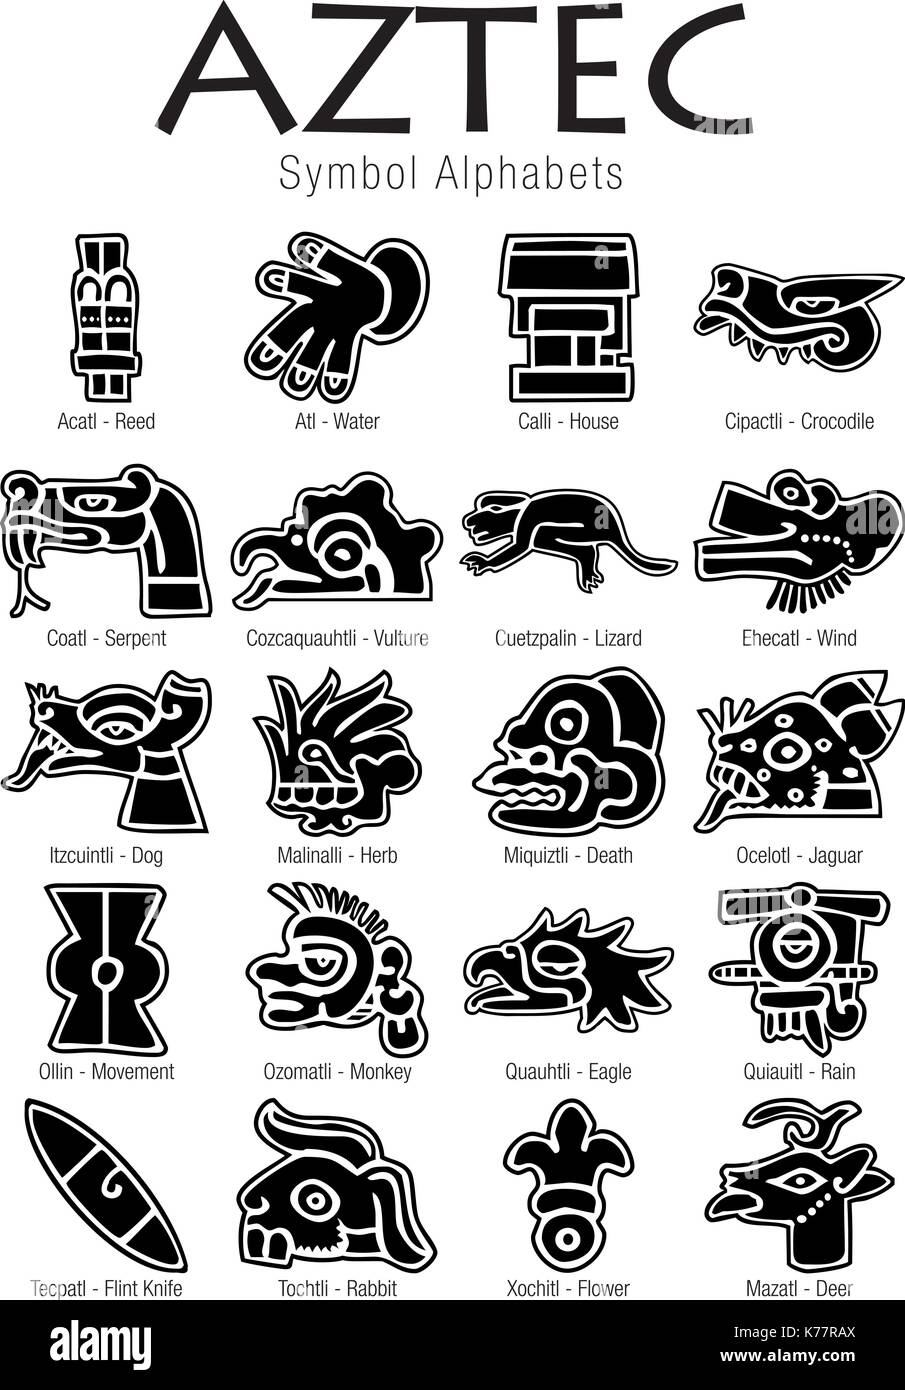 Set of Aztec Symbol Alphabets in black color on white background Stock Vector